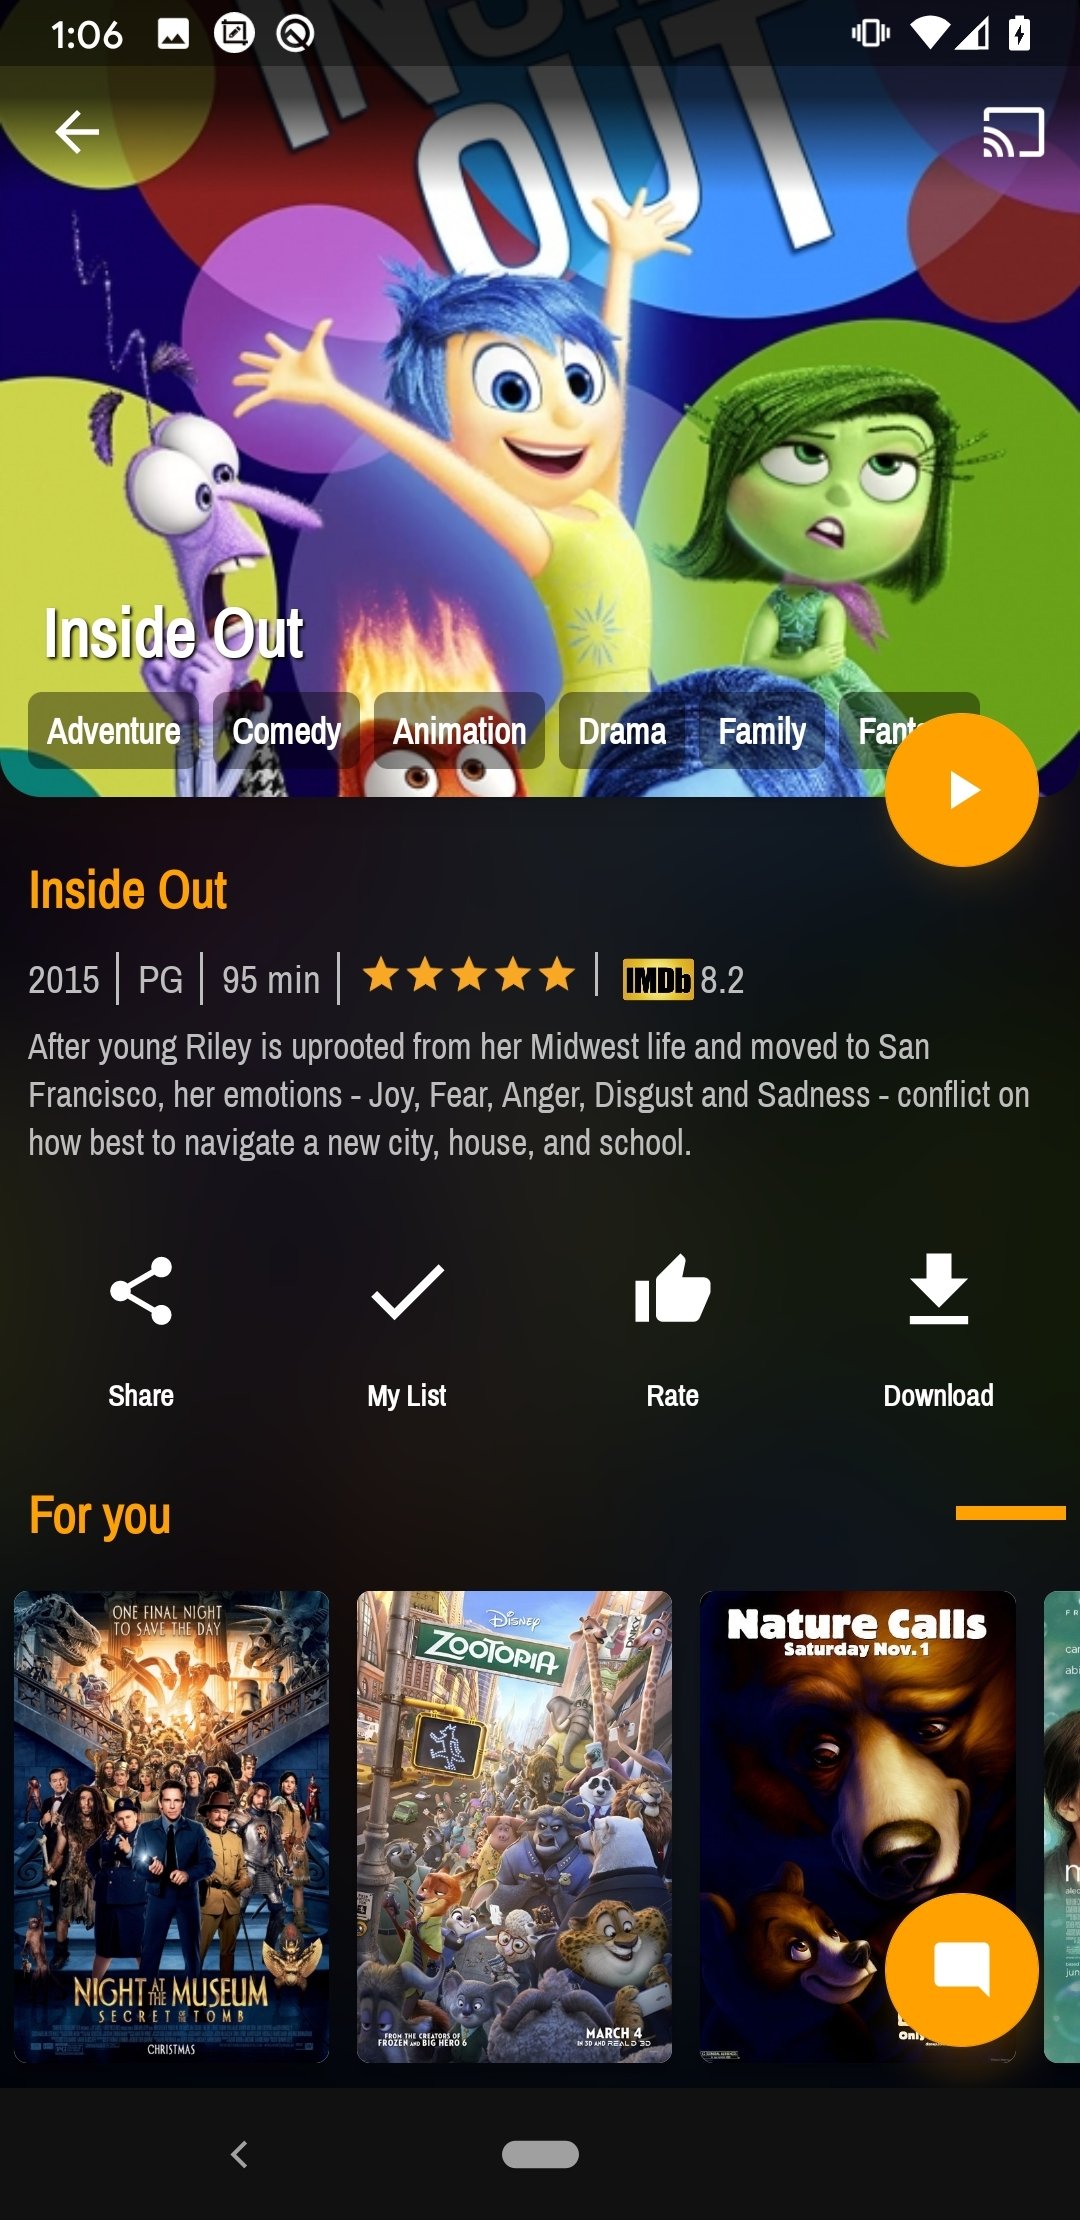 123Movies 2.0 - Download for Android APK Free